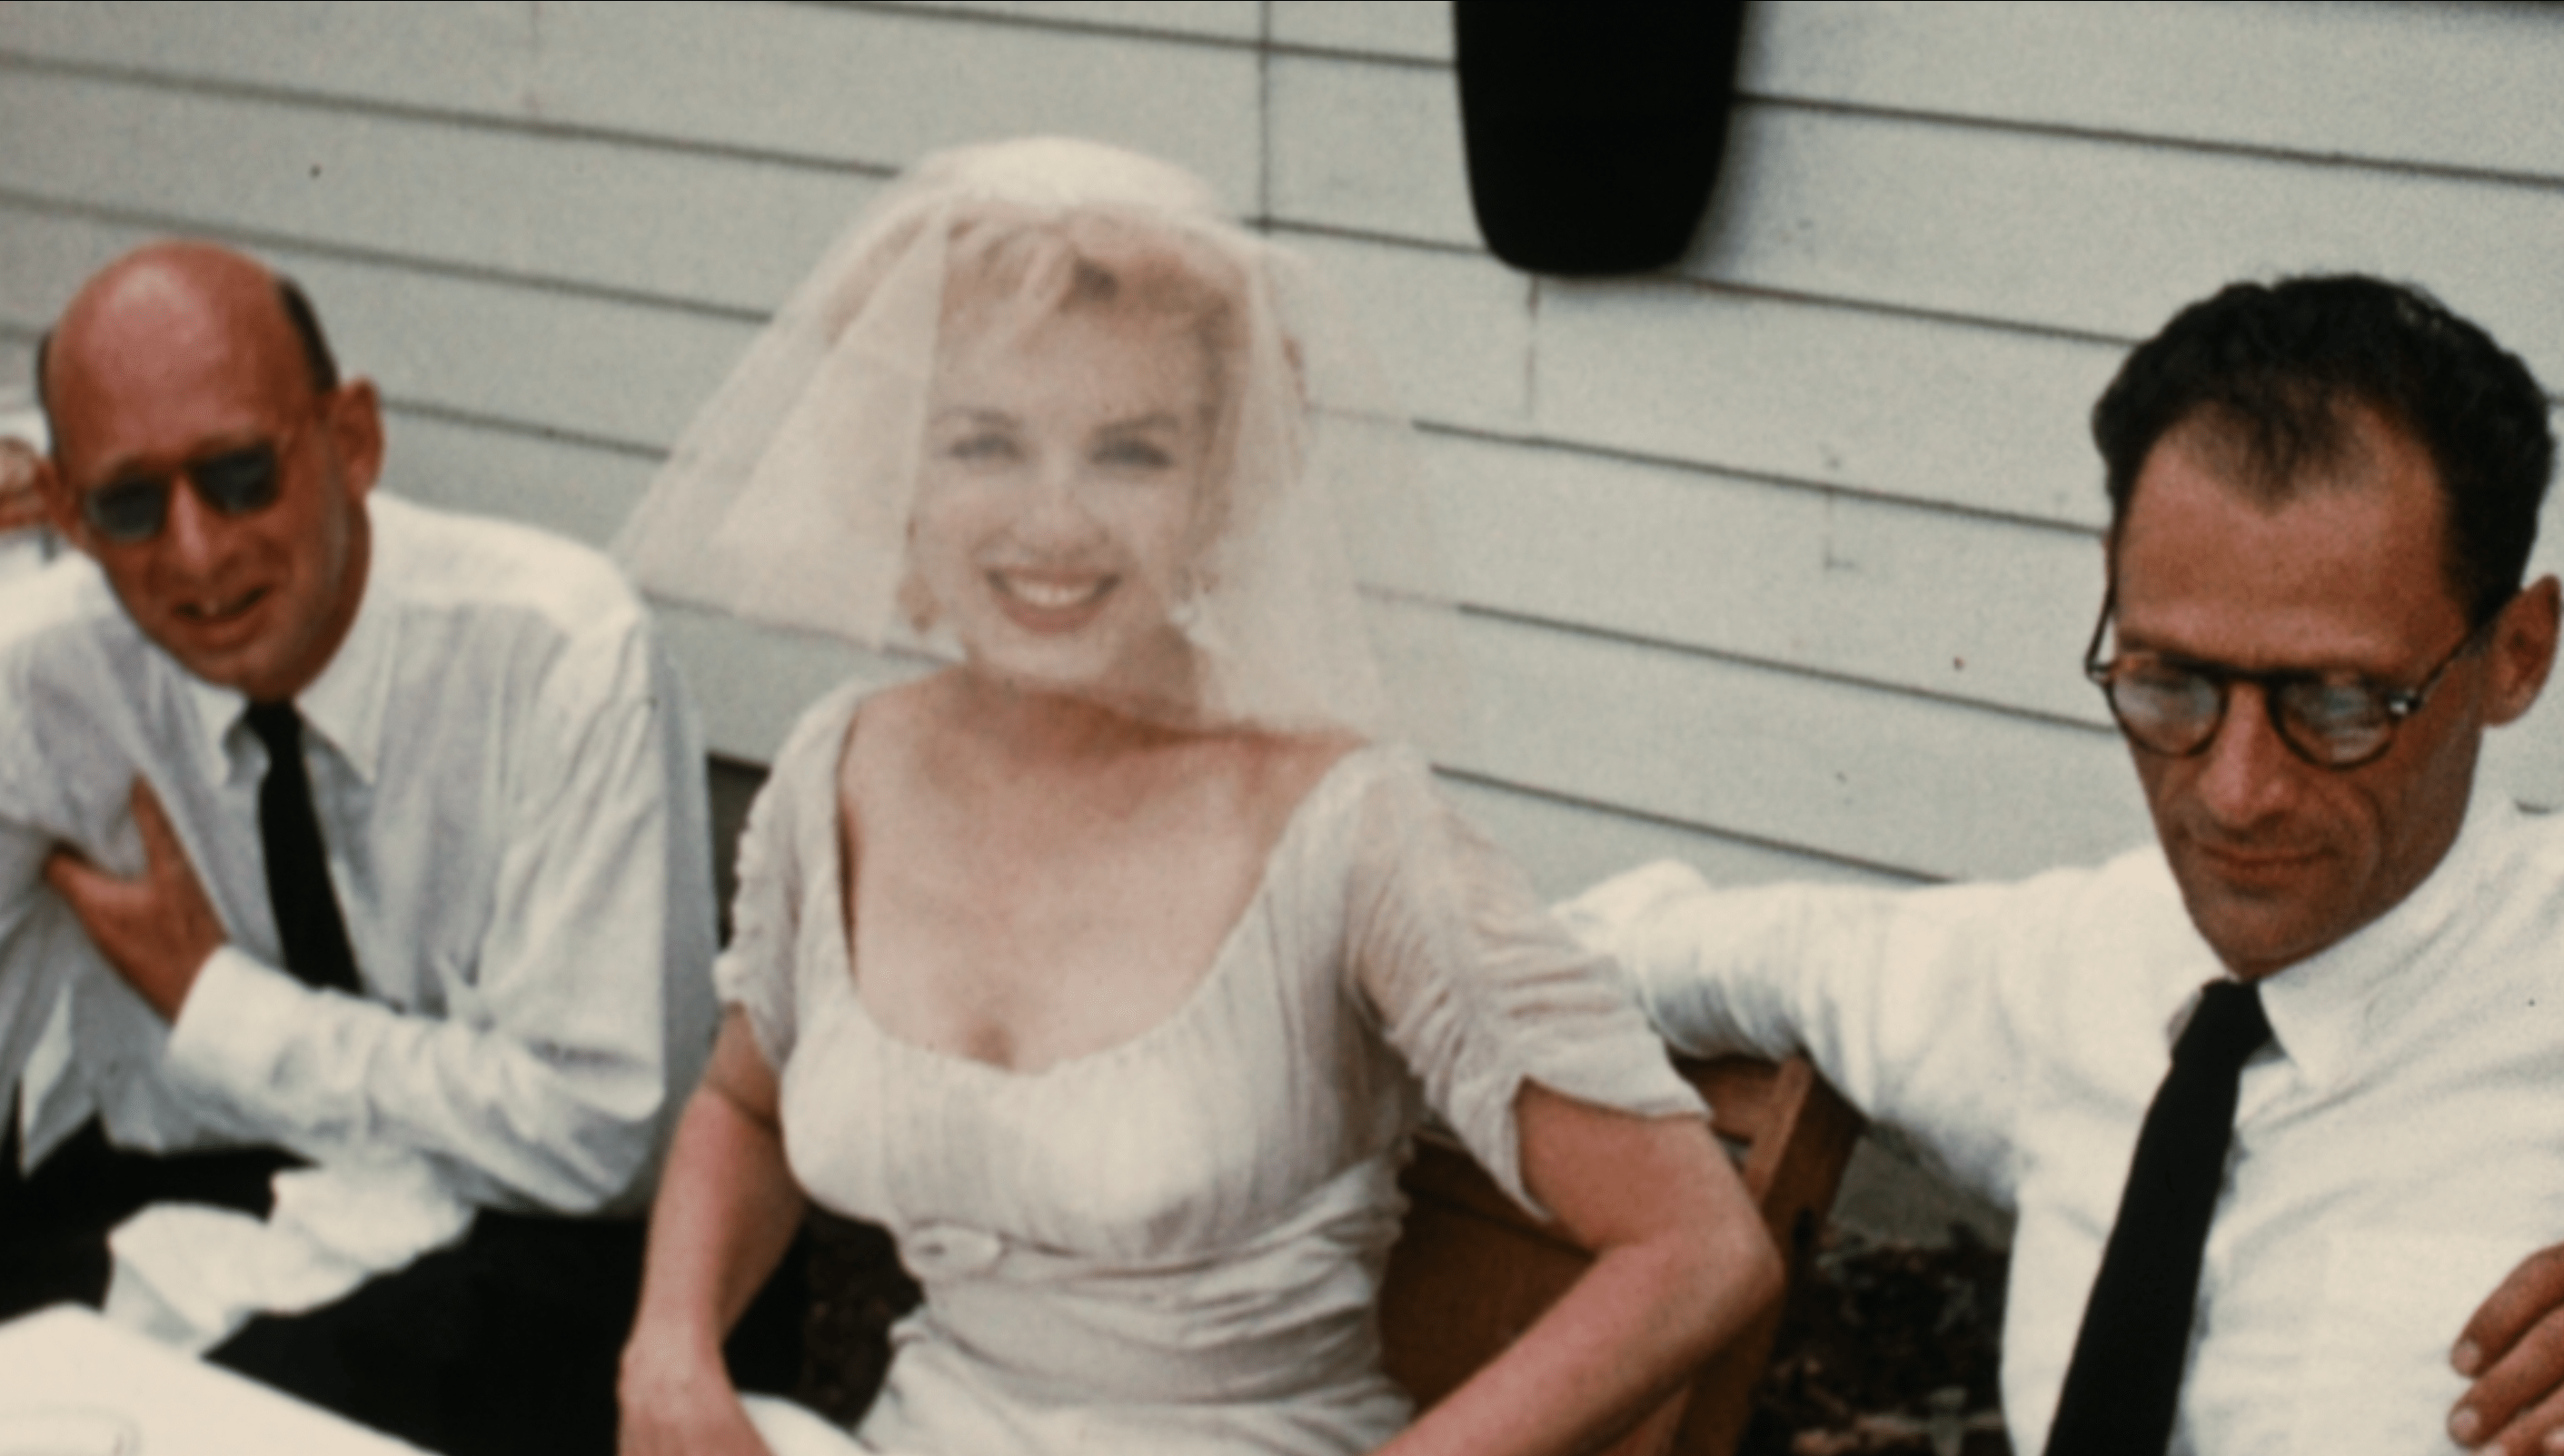 Marilyn Monroe in The Mystery of Marilyn Monroe: The Unheard Tapes (Courtesy of Netflix)